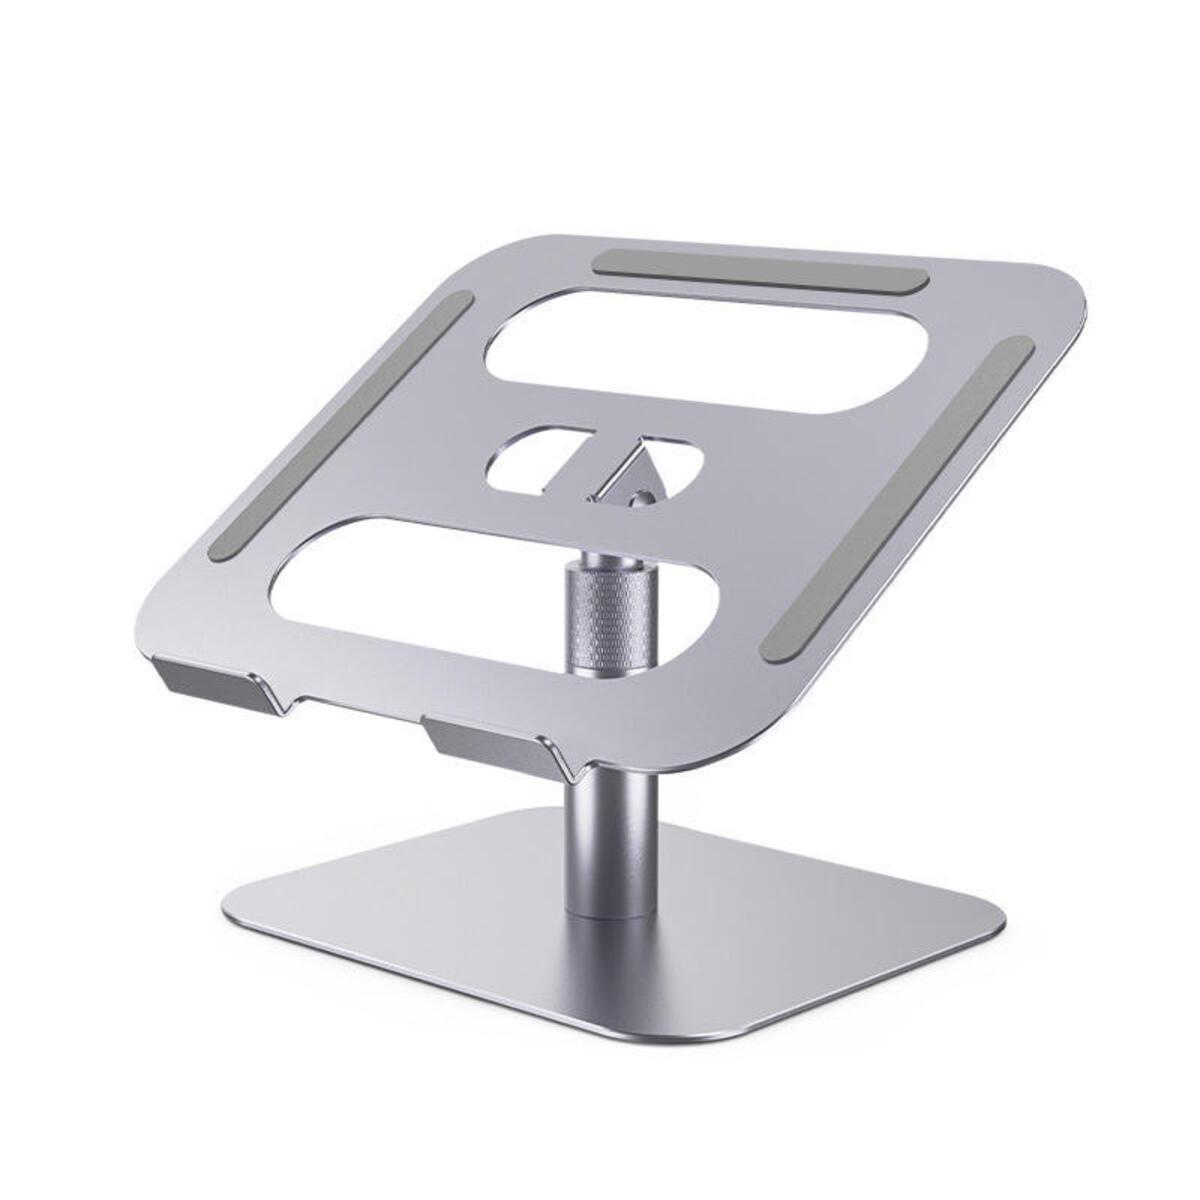 Adjustable Aluminum Alloy Portable Stand for Macbook iPad Pro